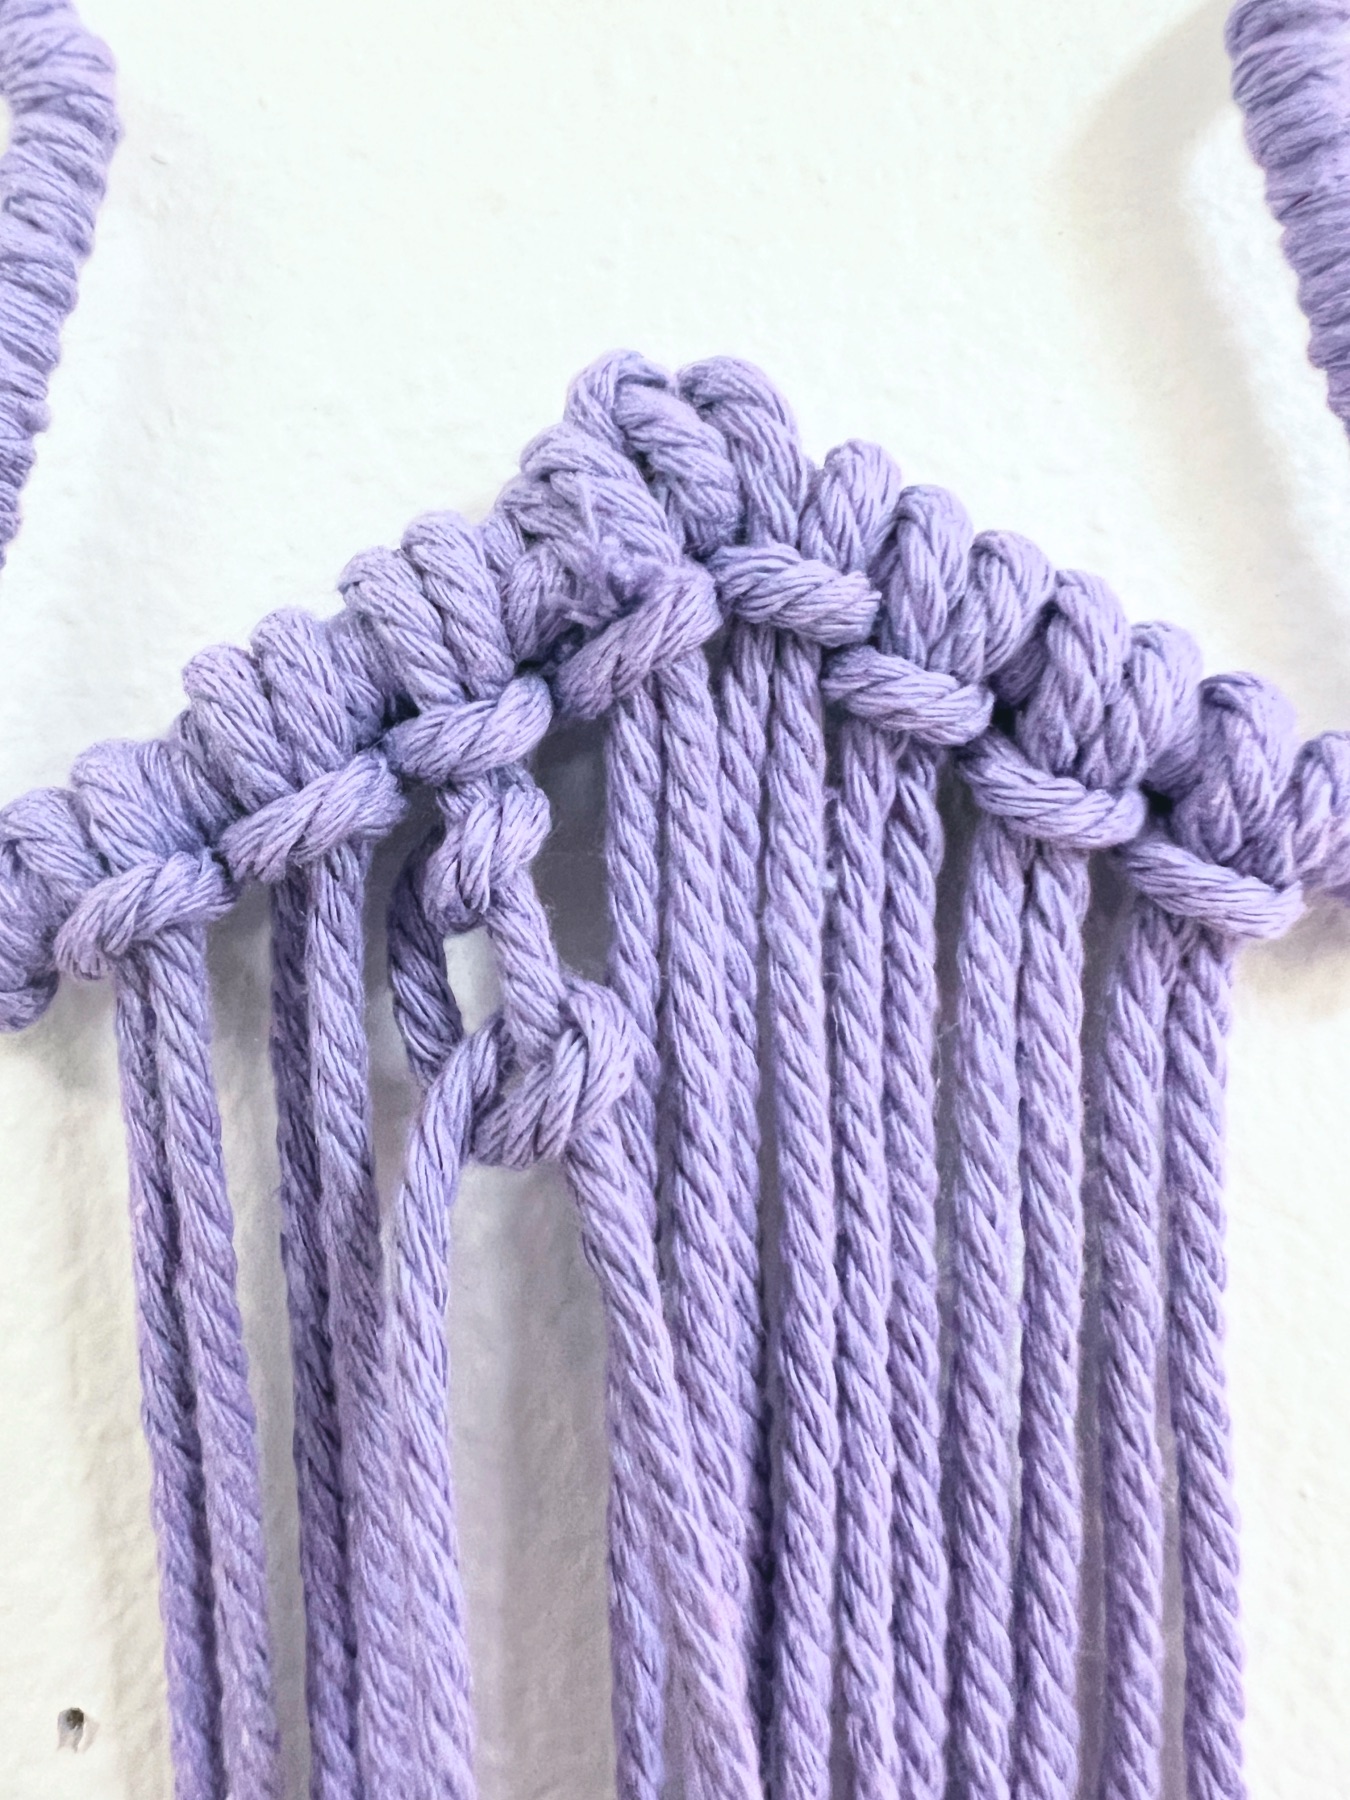 second knot of the double half hitch knots